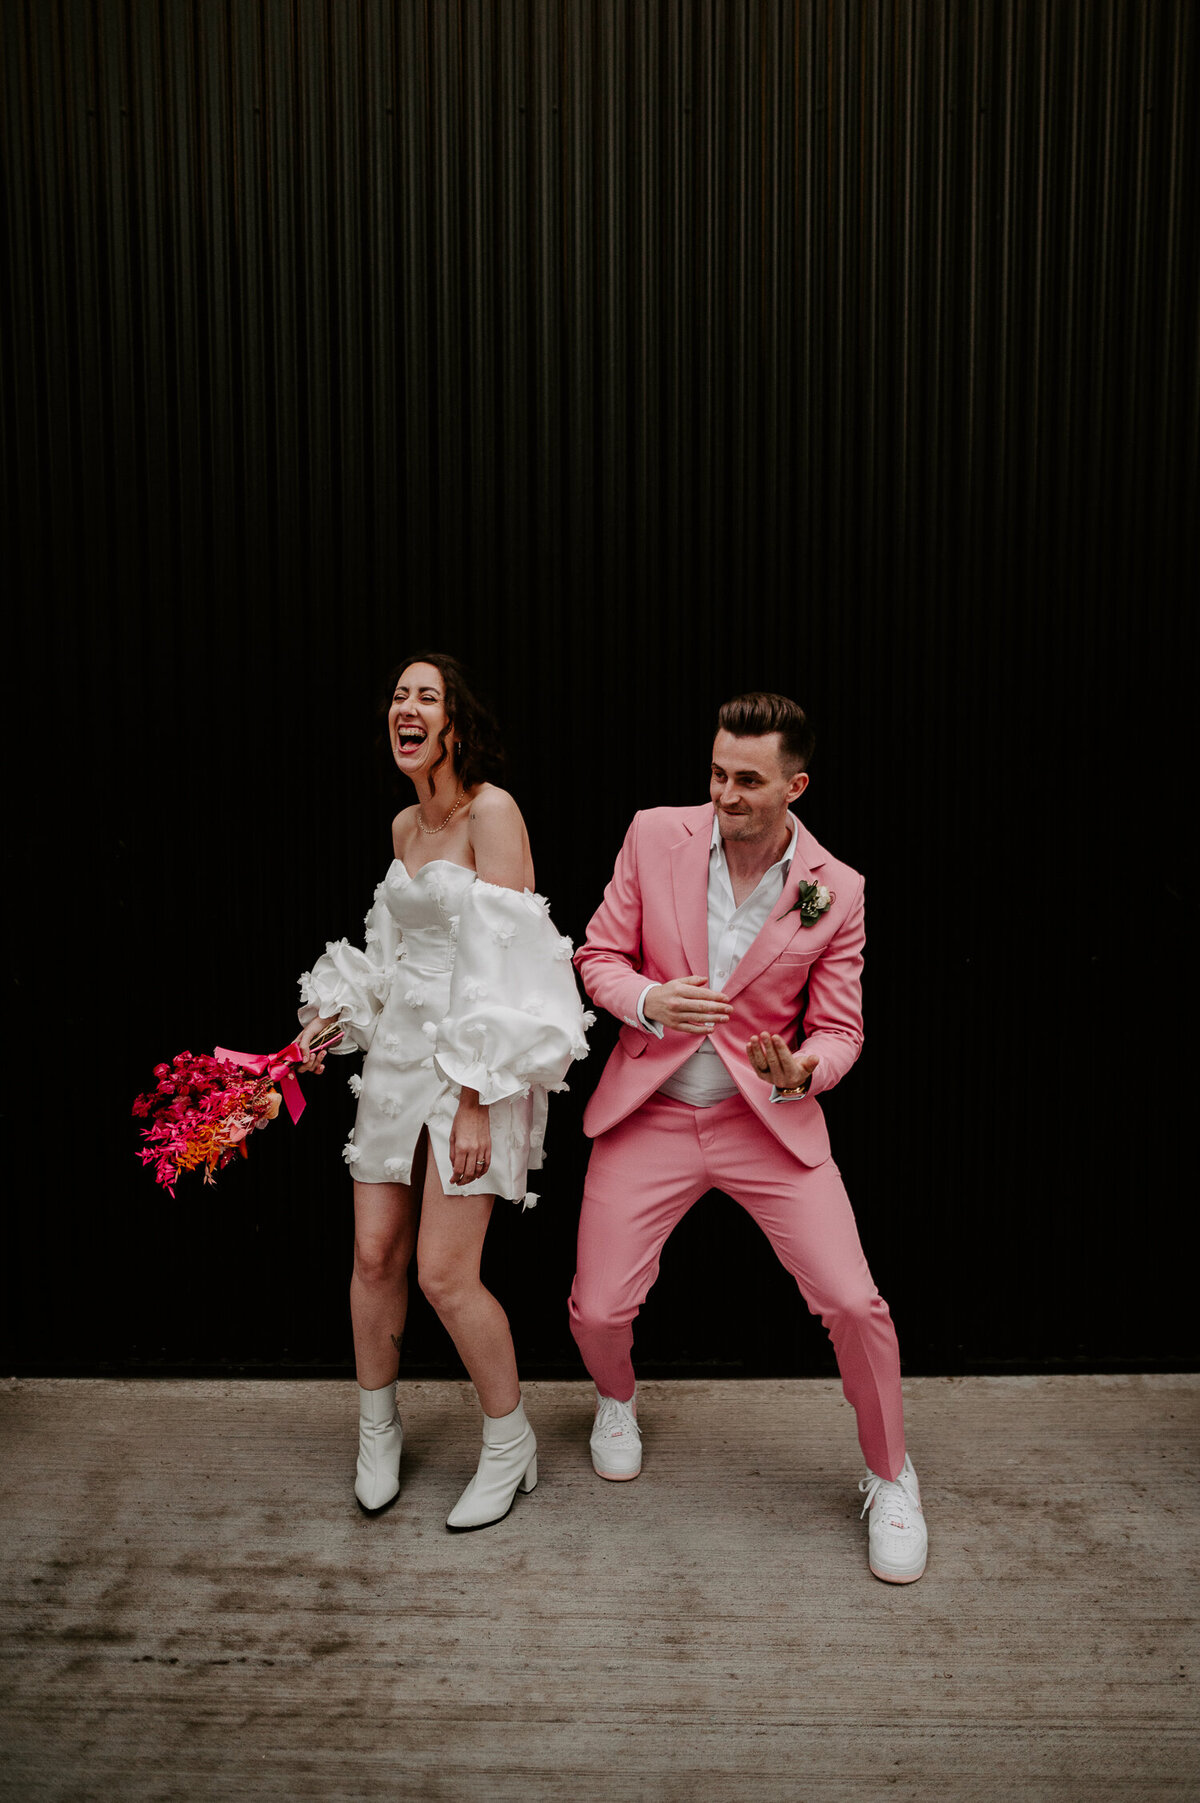 Bride in a short dress dances with a groom in a pink suit at The Shack Revolution